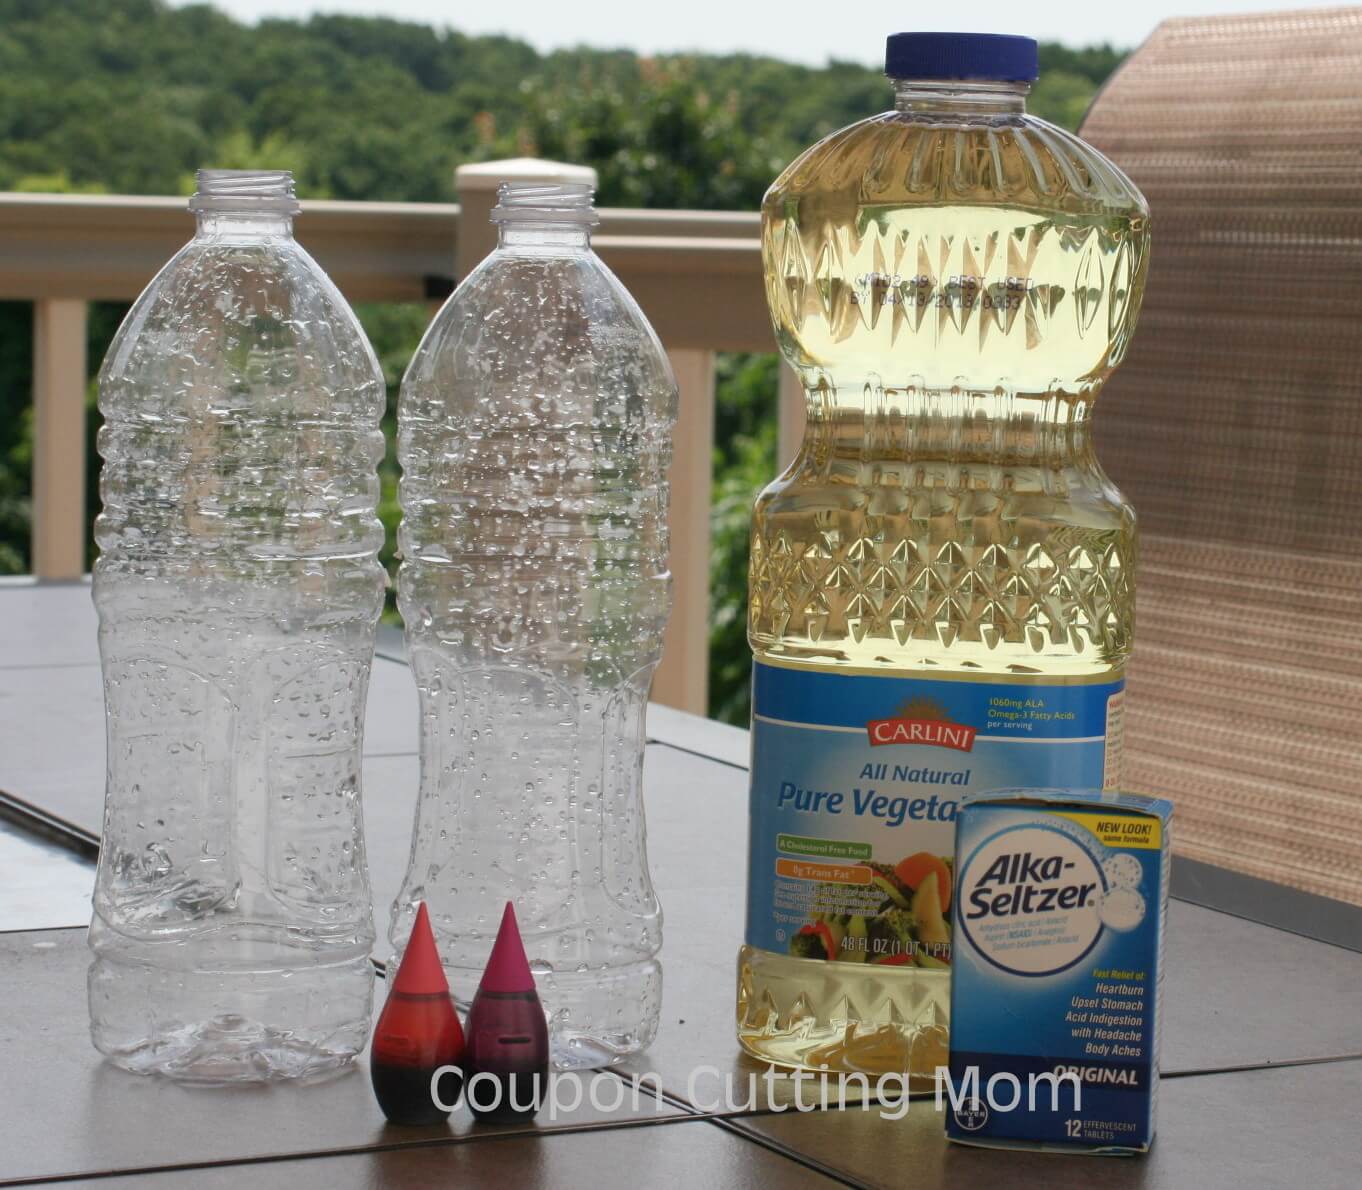 How to Make Homemade Lava Lamps